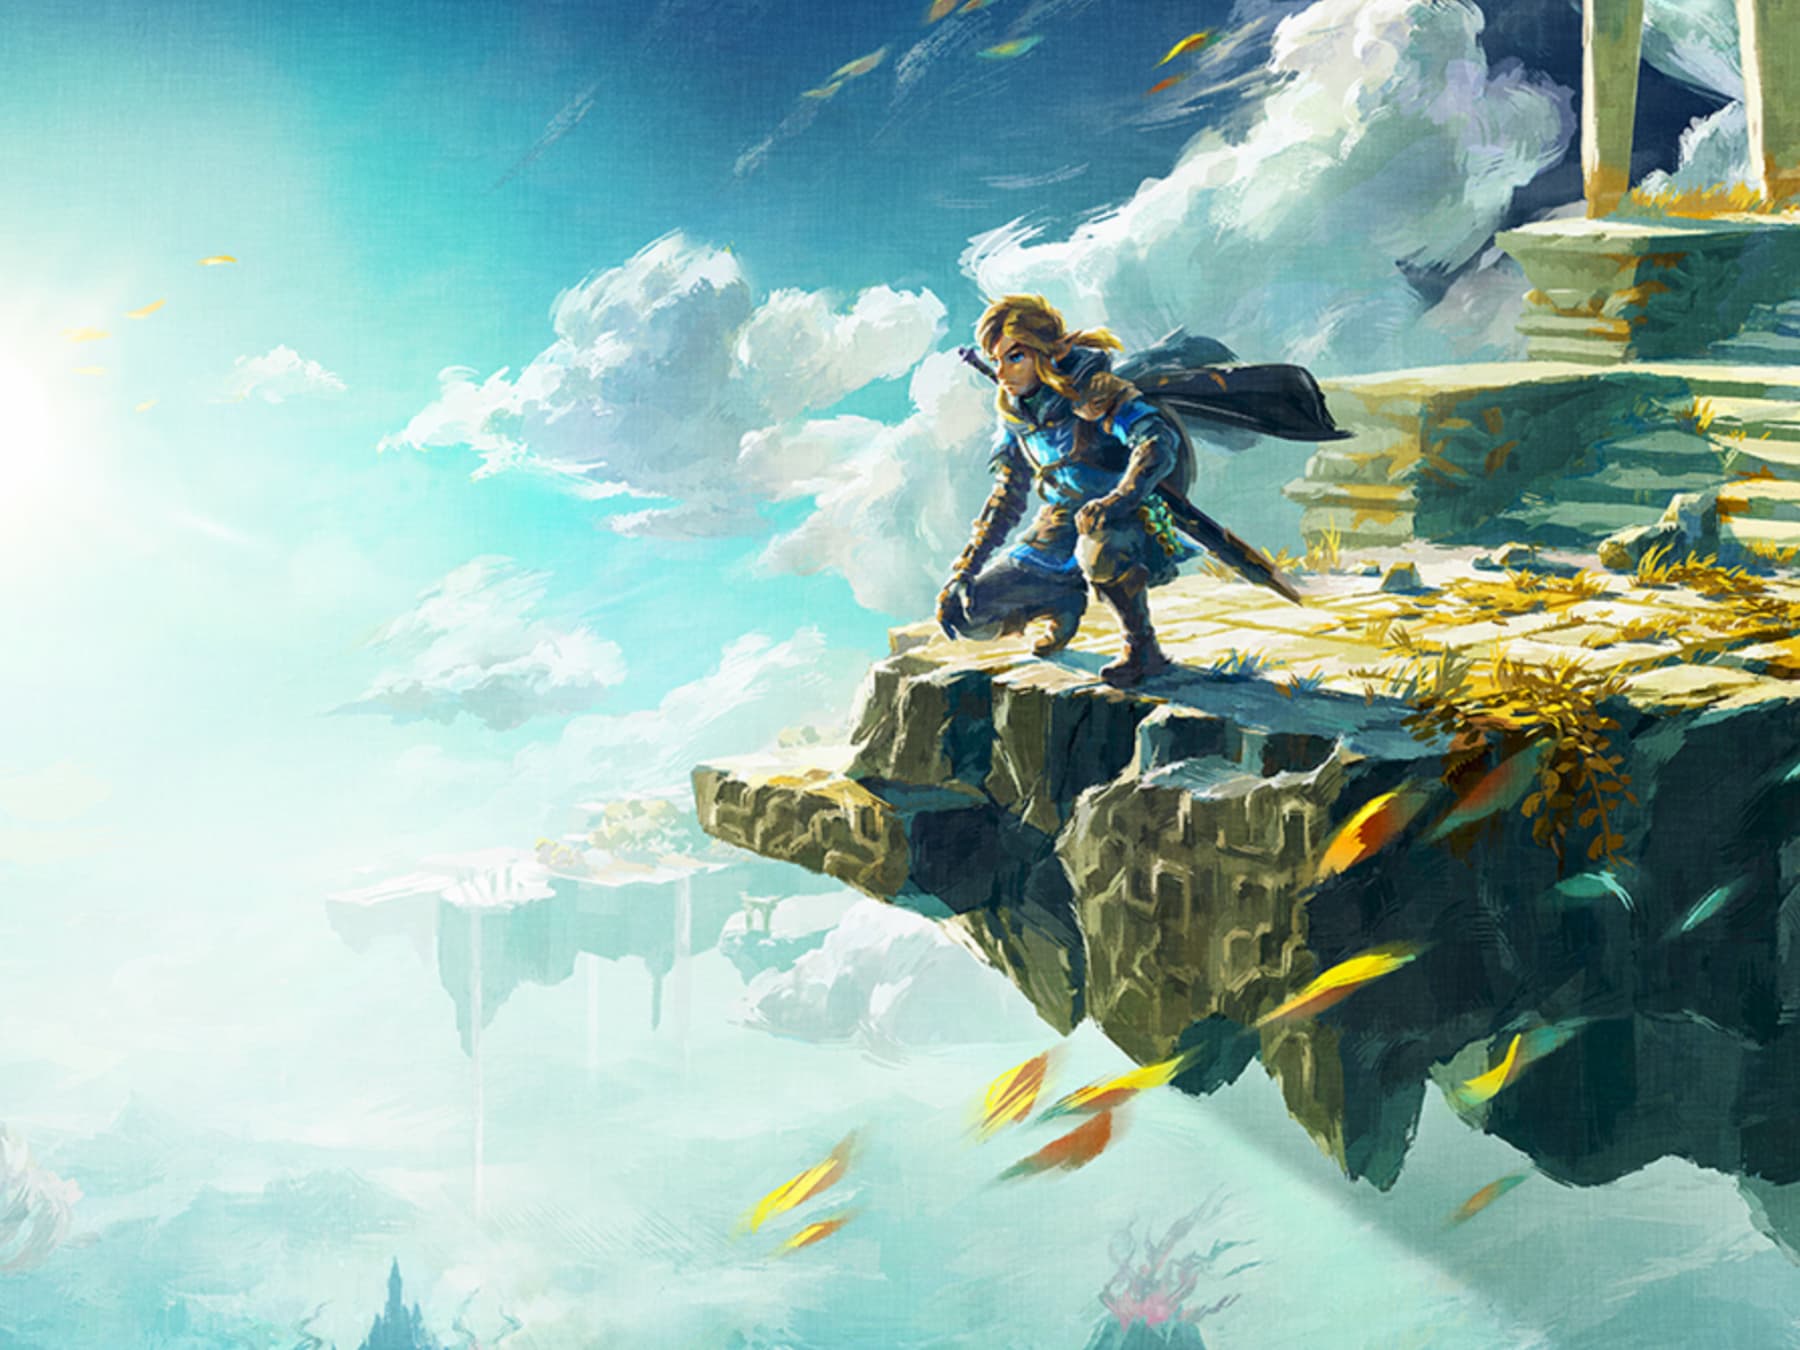 All the wonders of the world of Zelda